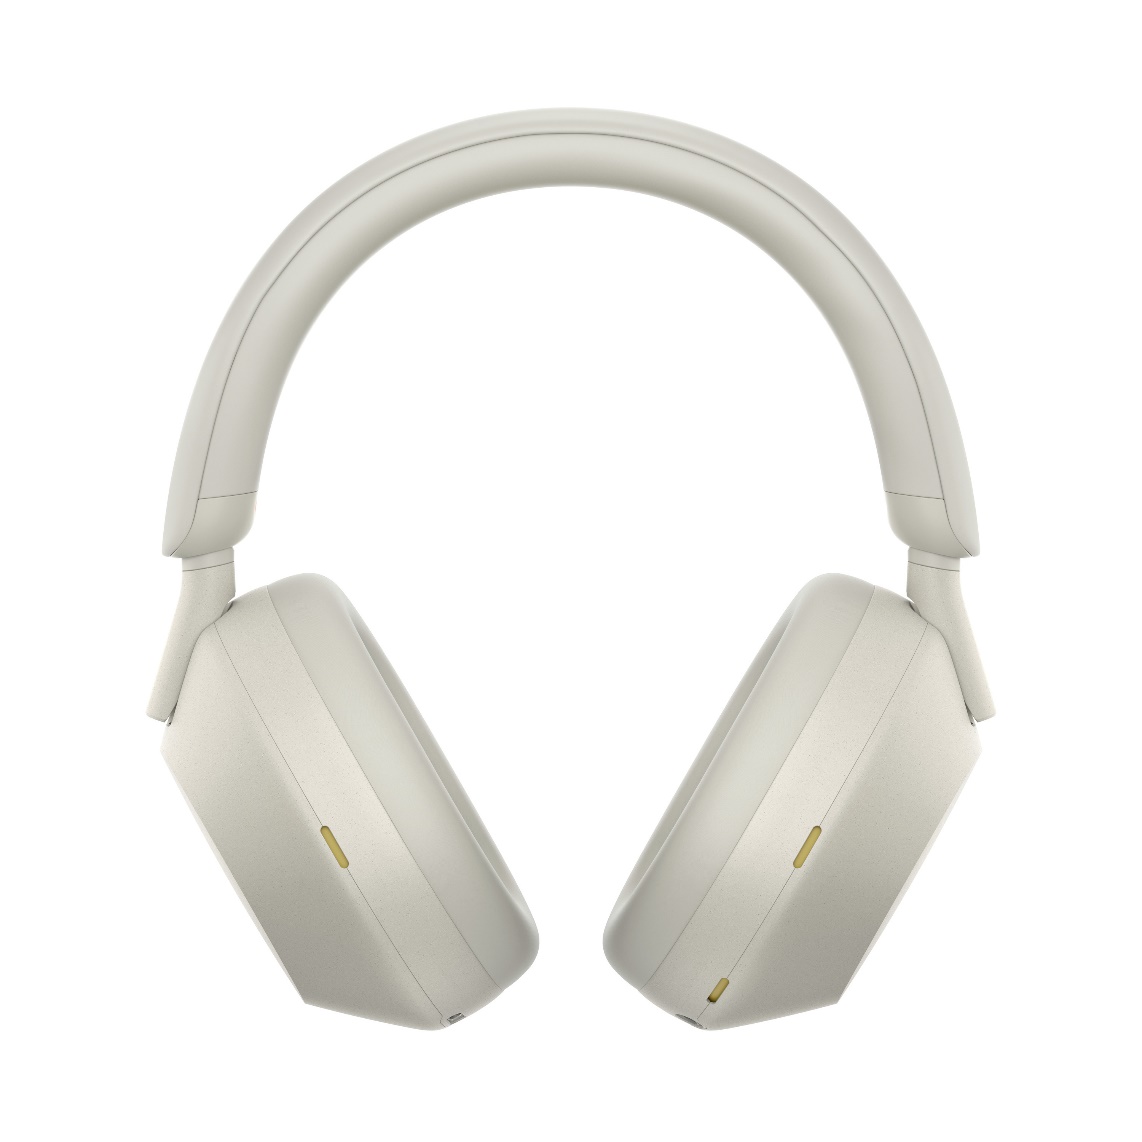 Sony introduces the WH-1000XM5 headphones - The pinnacle of the new generation of noise-cancelling headphones - Photo 1.